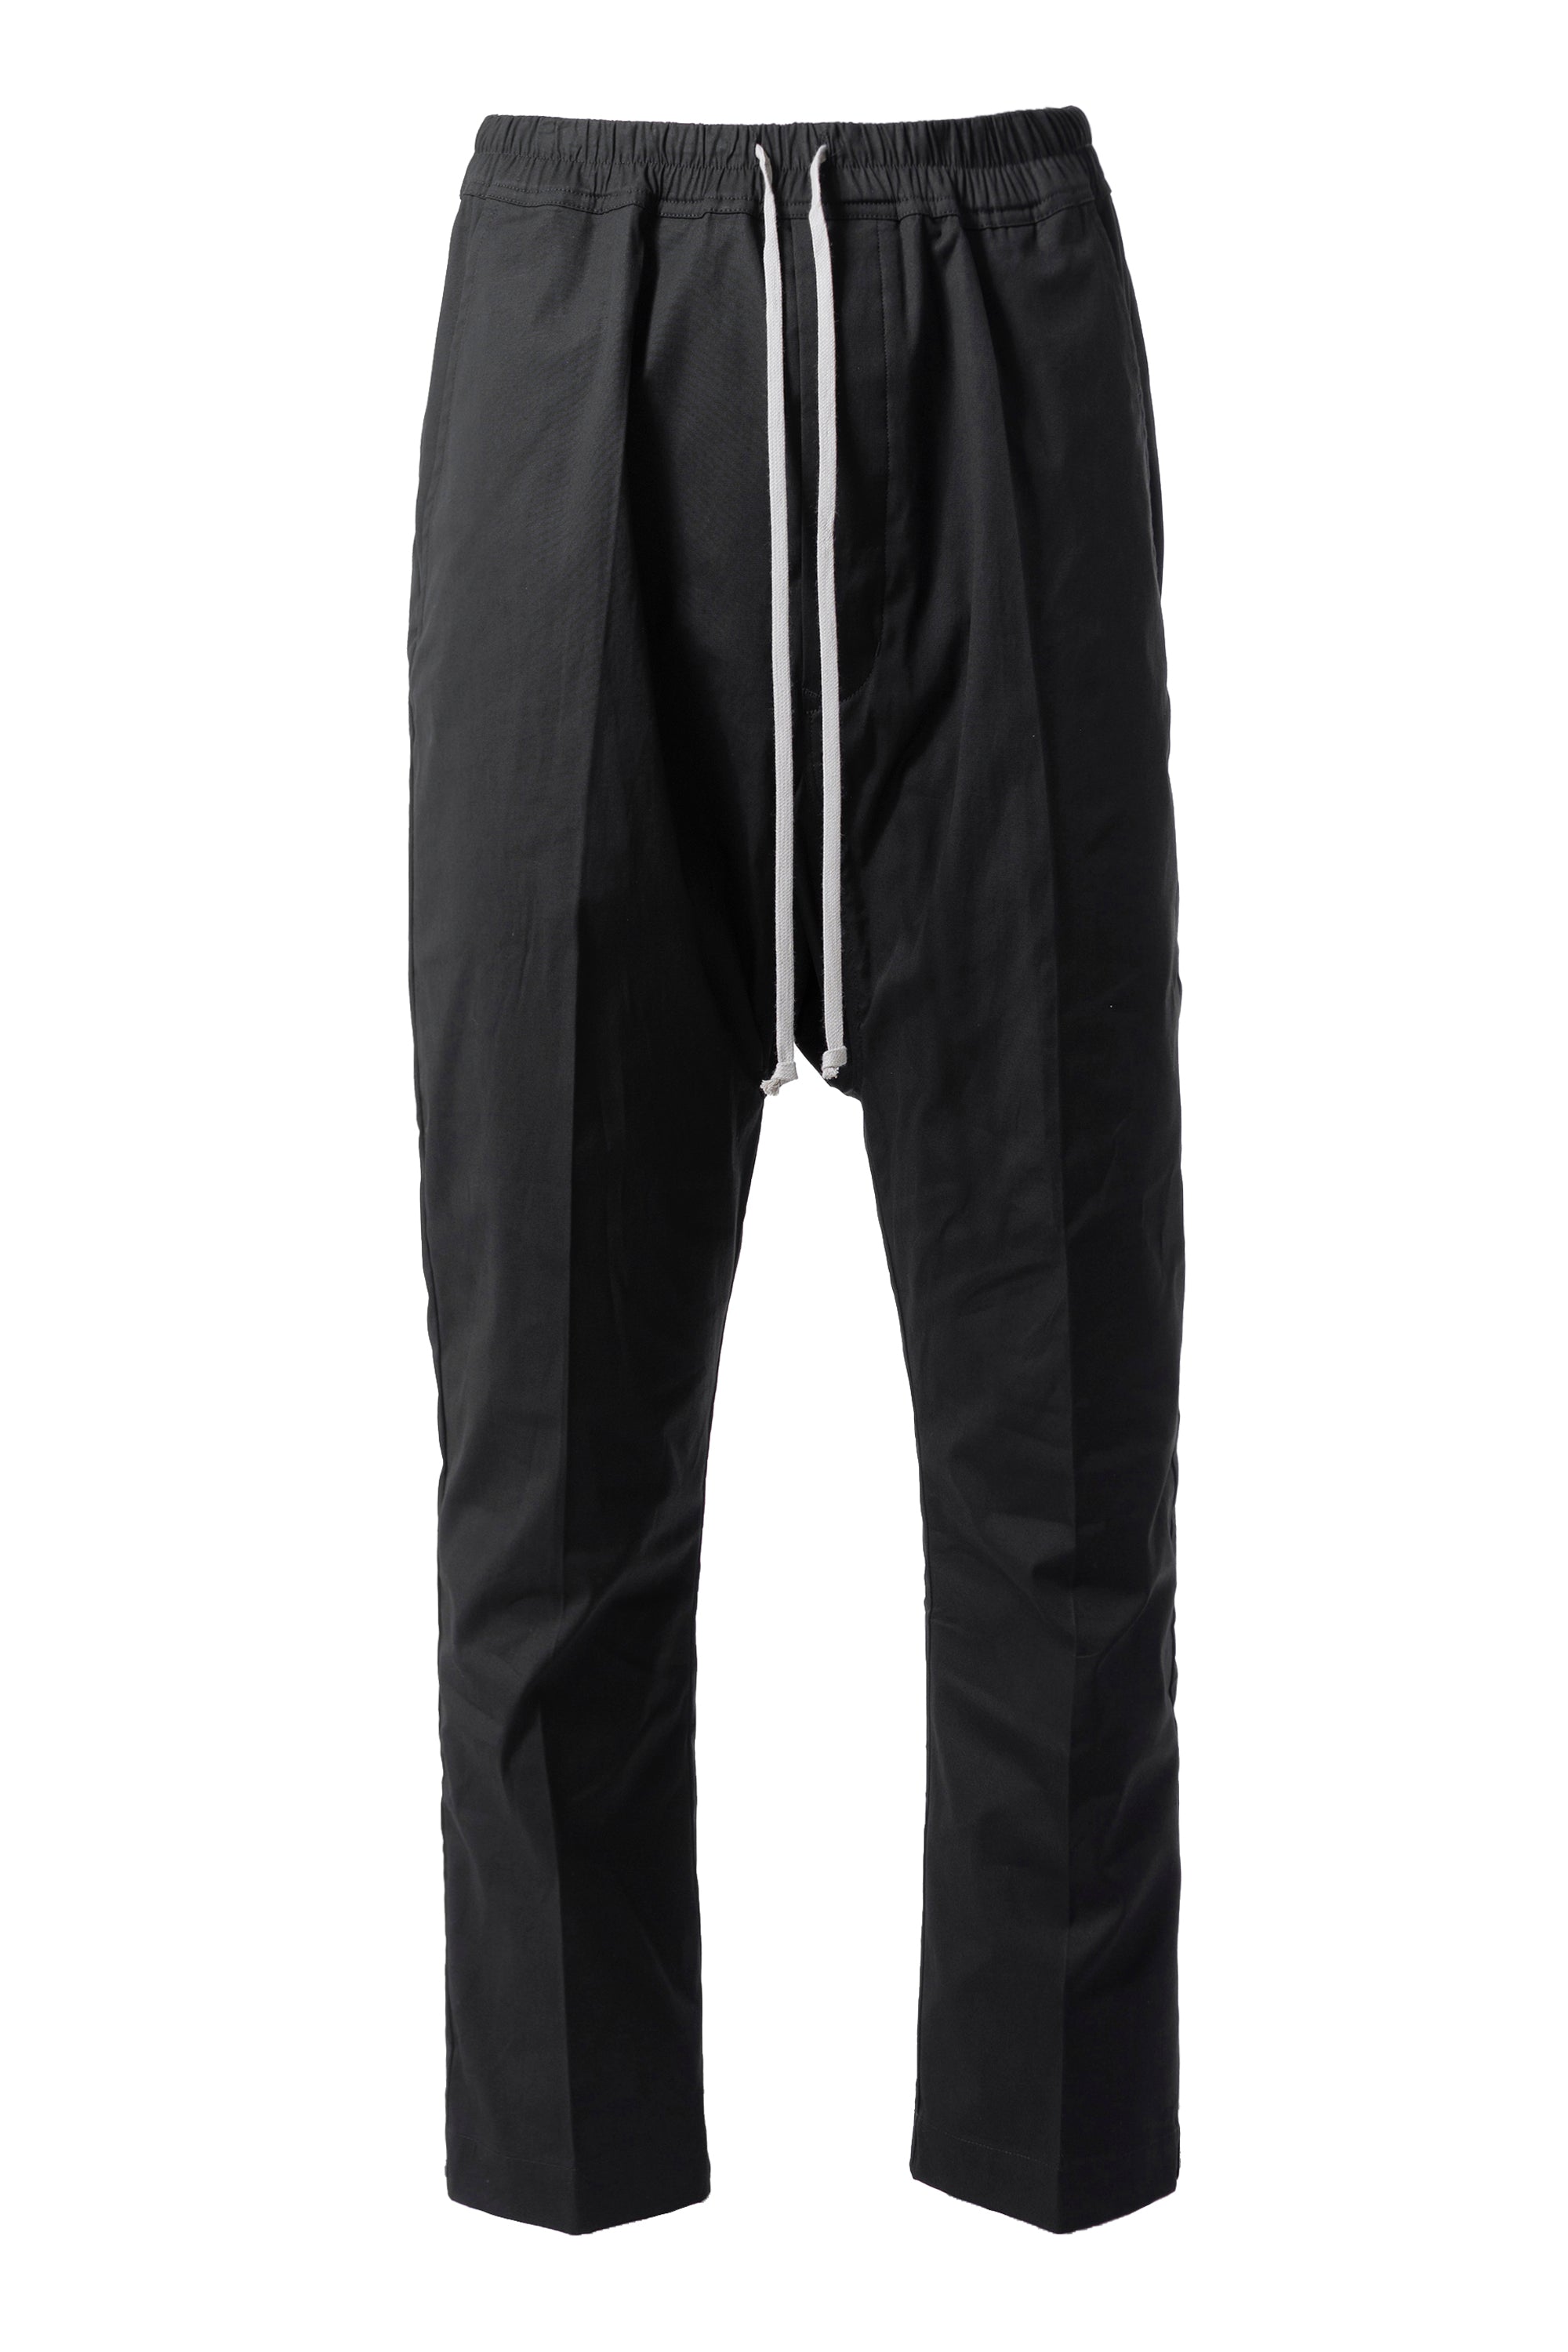 TheSoloist. double knee drawstring pant.-